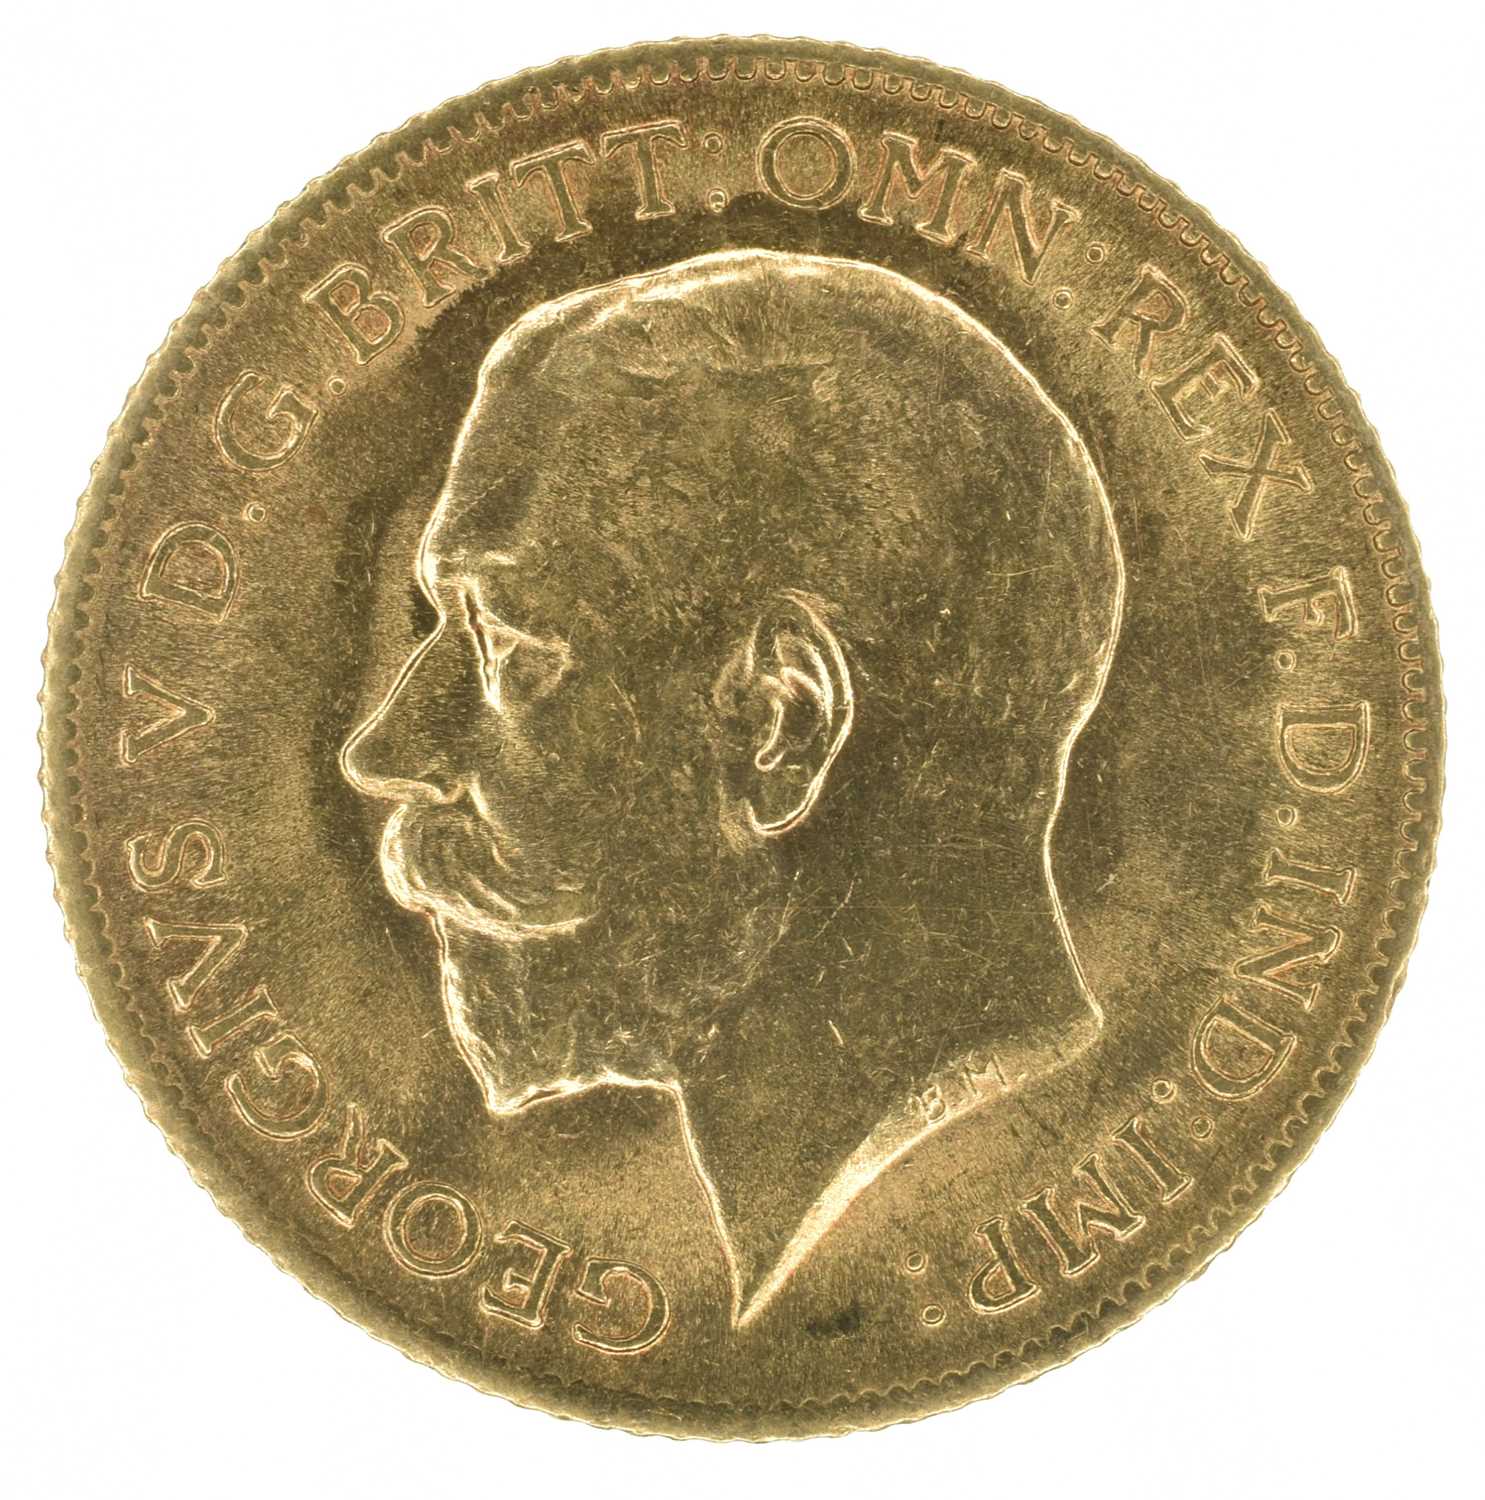 King George V, Half-Sovereign, 1912 and two U.S. gold dollars, 1889.